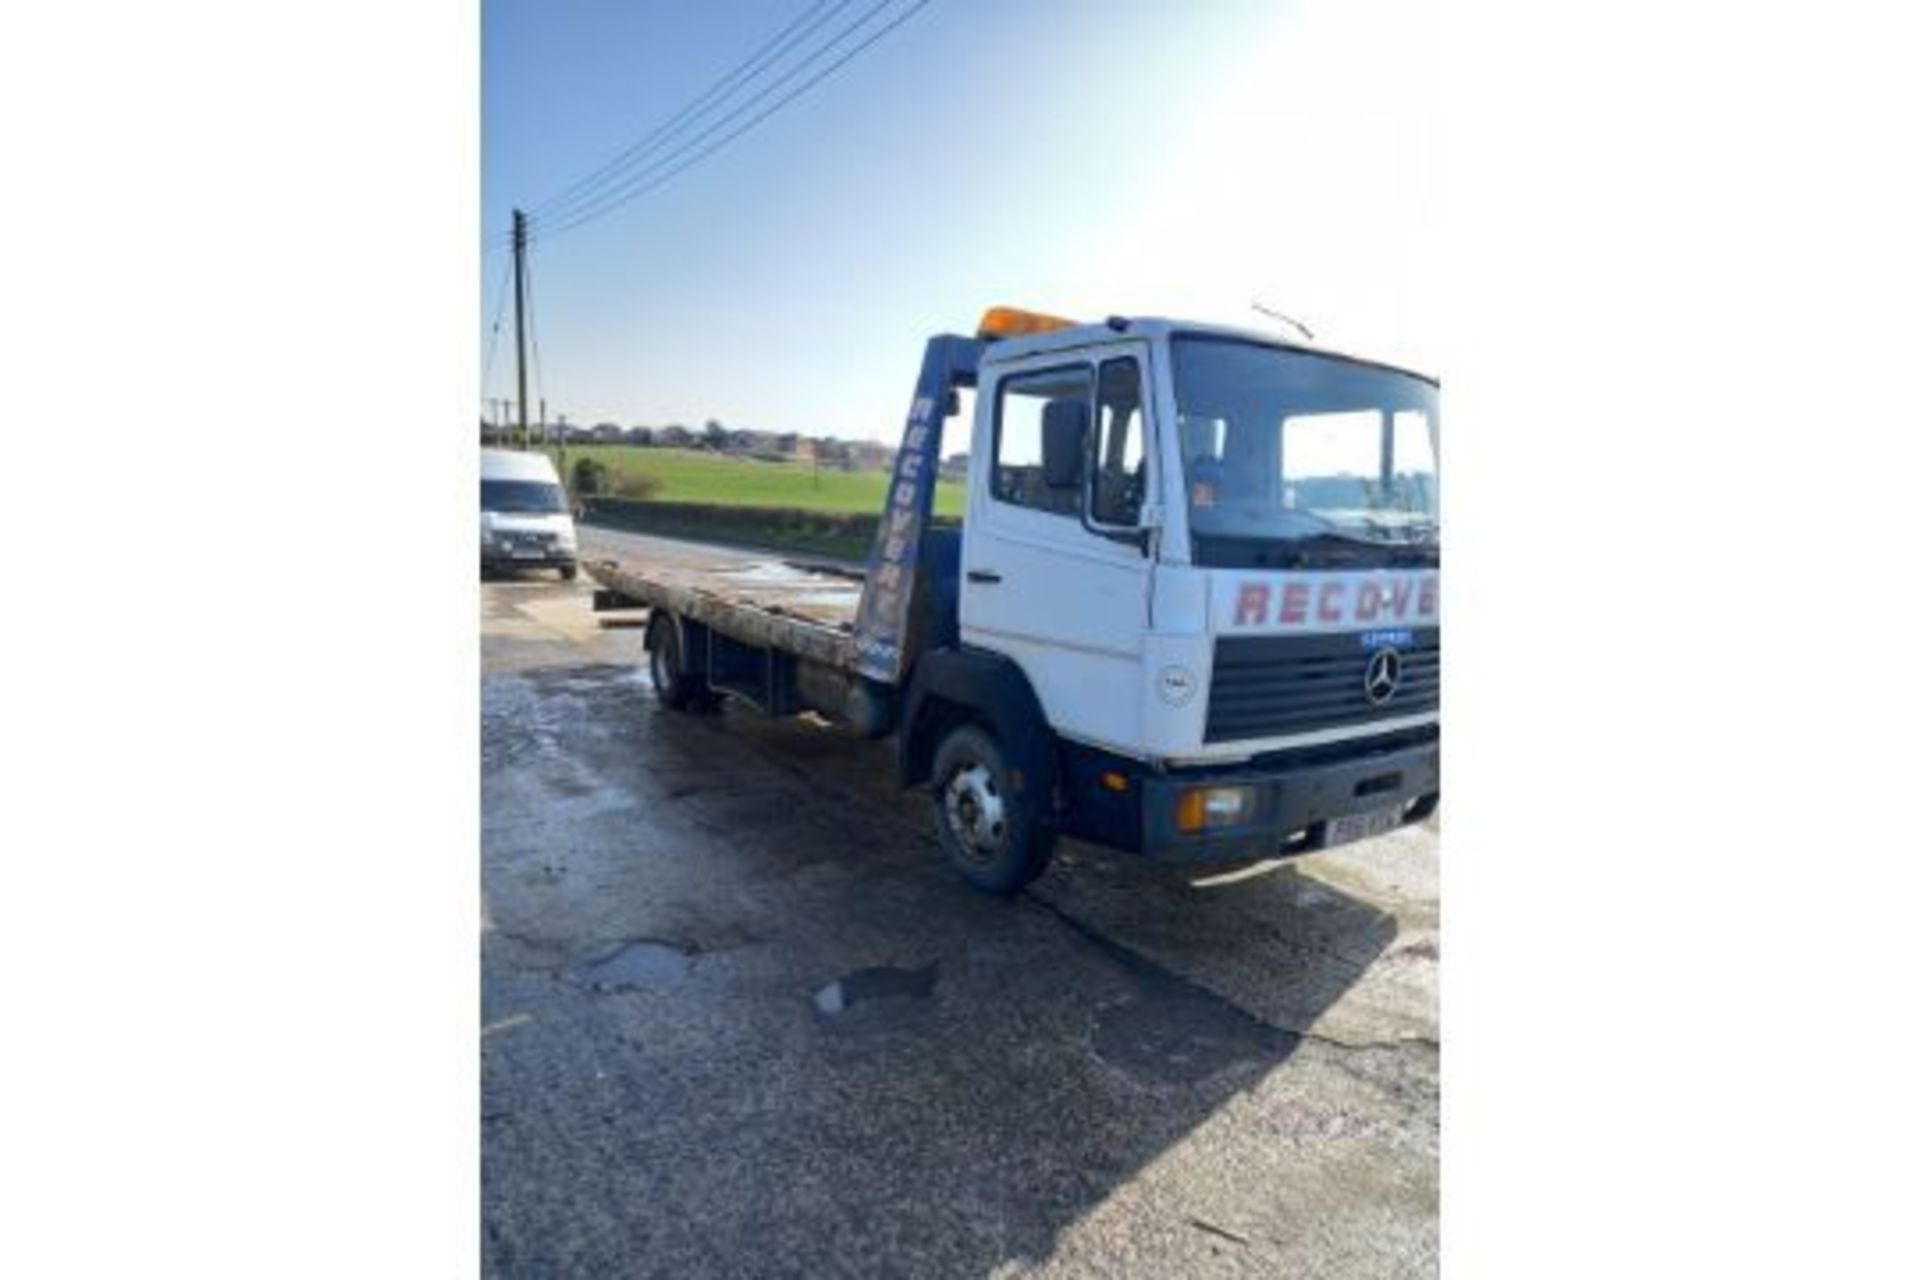 1997 MERCEDES LK900 RECOVERY TRUCK NO PSV REQUIRED